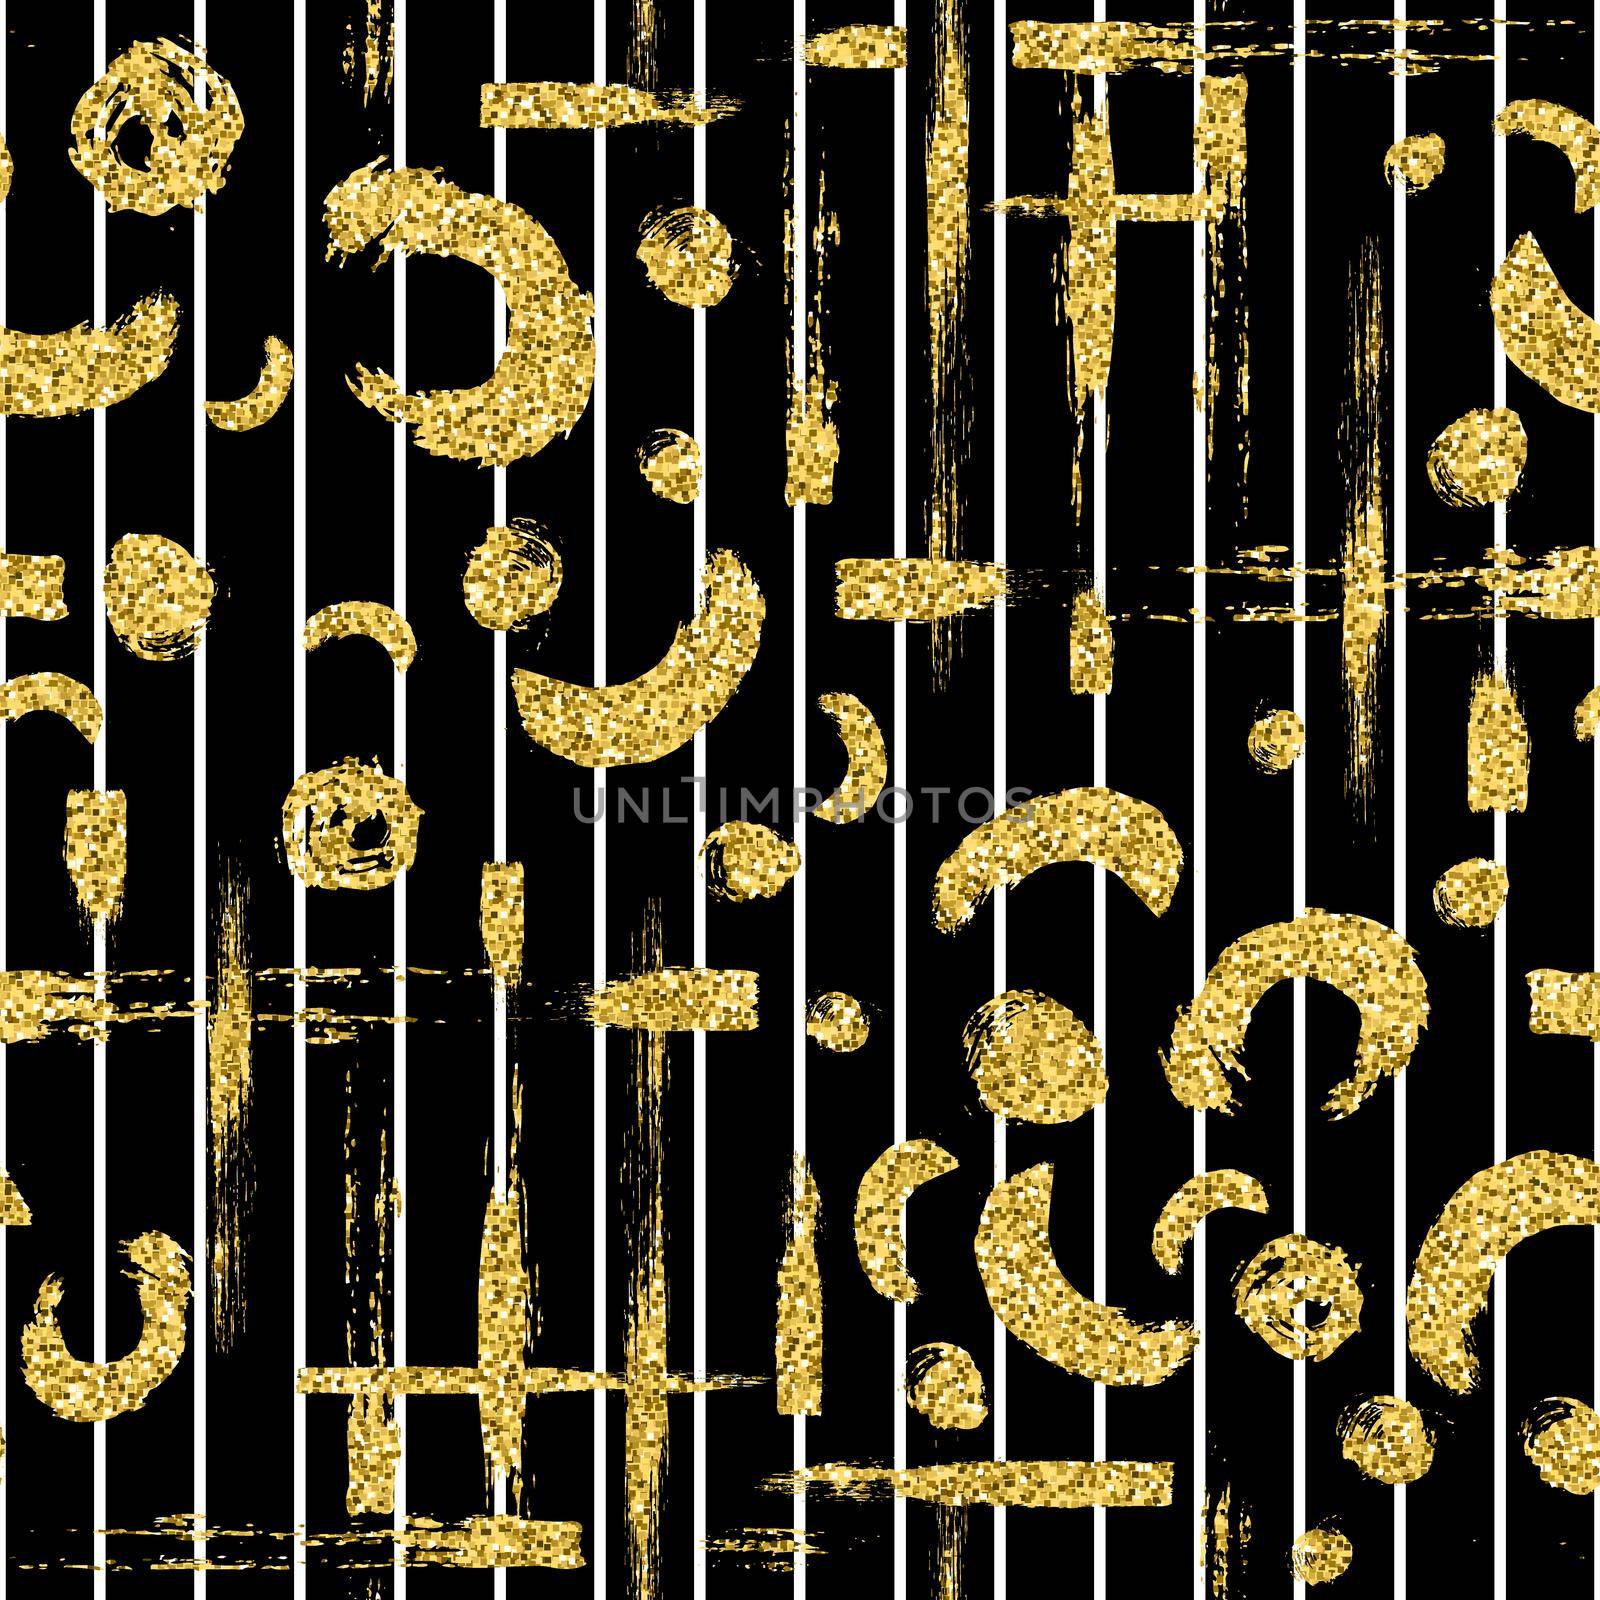 Modern seamless pattern with gold glitter brush stripe, blot and spot. Golden, white color on black background. Hand painted metallic texture. Shiny spark elements. Fashion modern style. Repeat print. by DesignAB